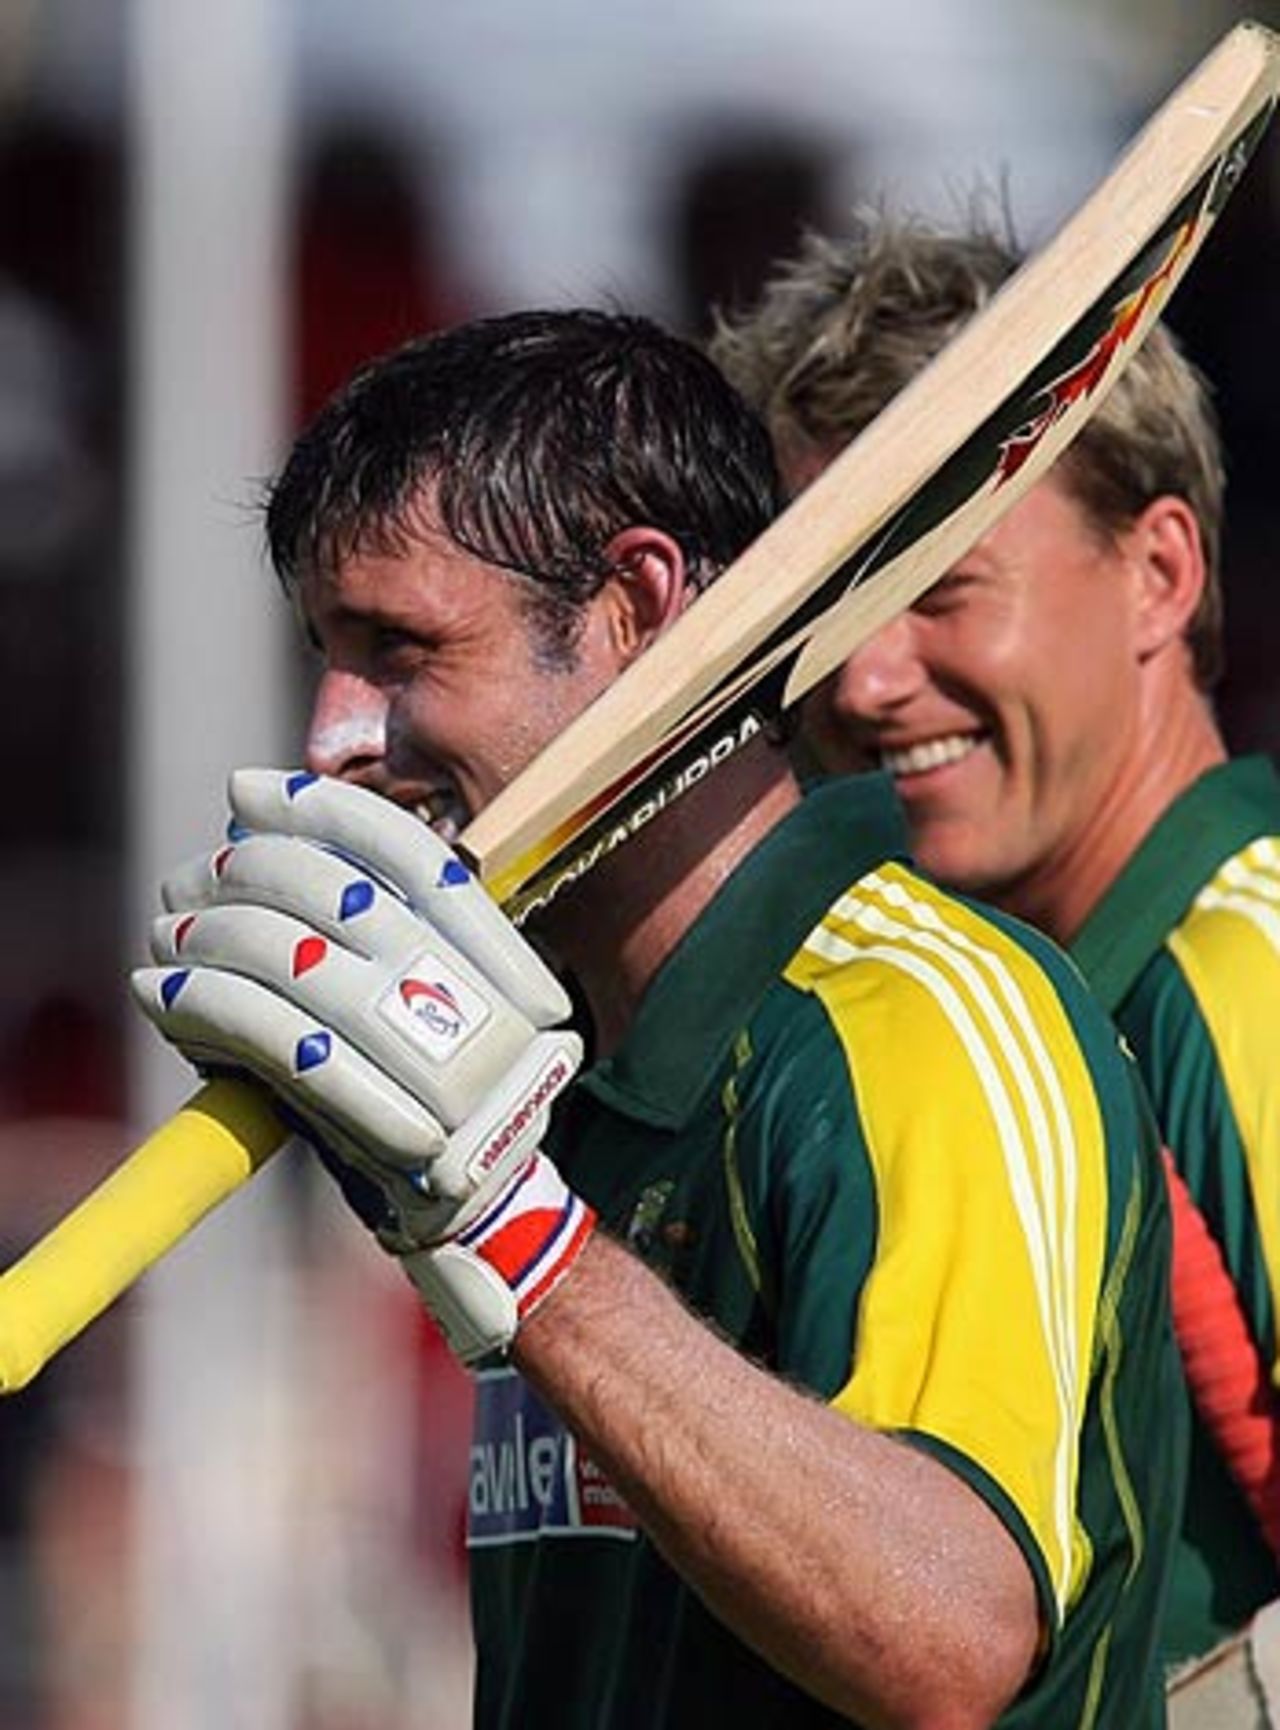 Michael Hussey is all smiles as he walks back after his unbeaten ton as Brett Lee looks on, Australia v West Indies, DLF Cup, 4th match, September 18, 2006